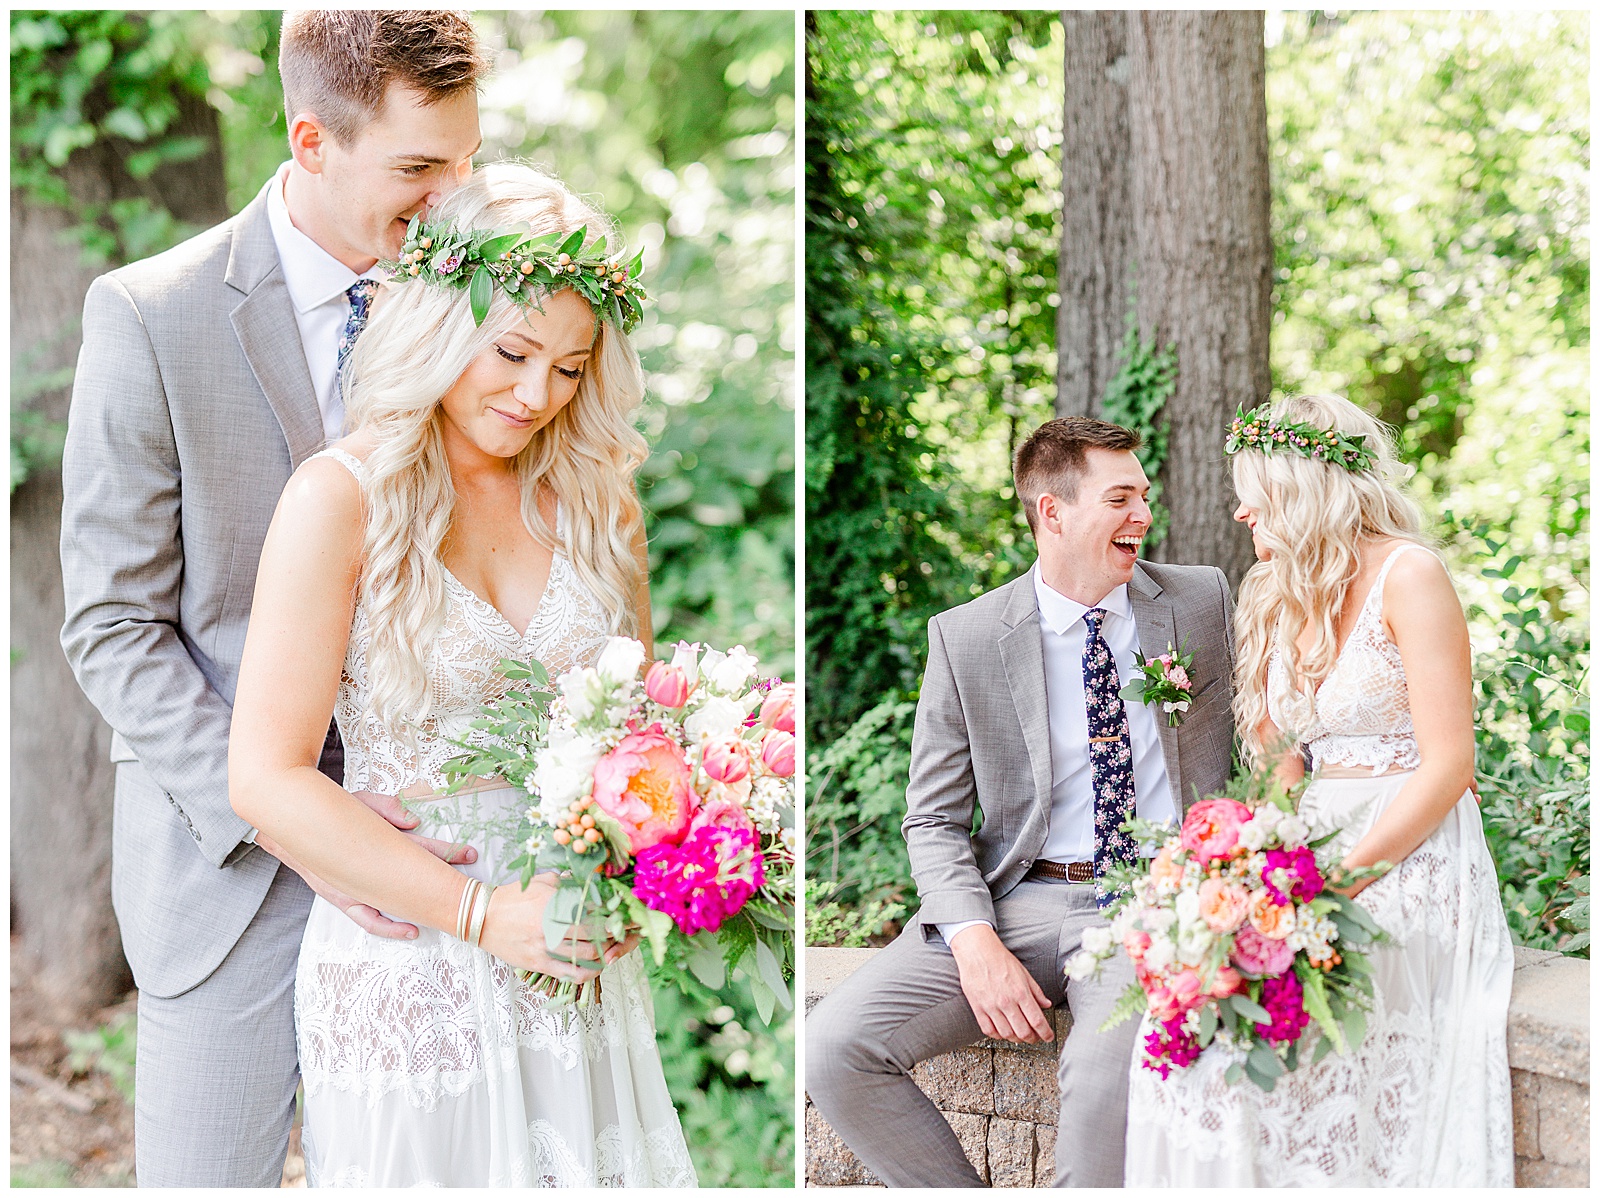 Enchanting Woodland Portraits of Bride and Groom from Boho Chic Summer Wedding in Charlotte, NC | check out the full wedding at KevynDixonPhoto.com